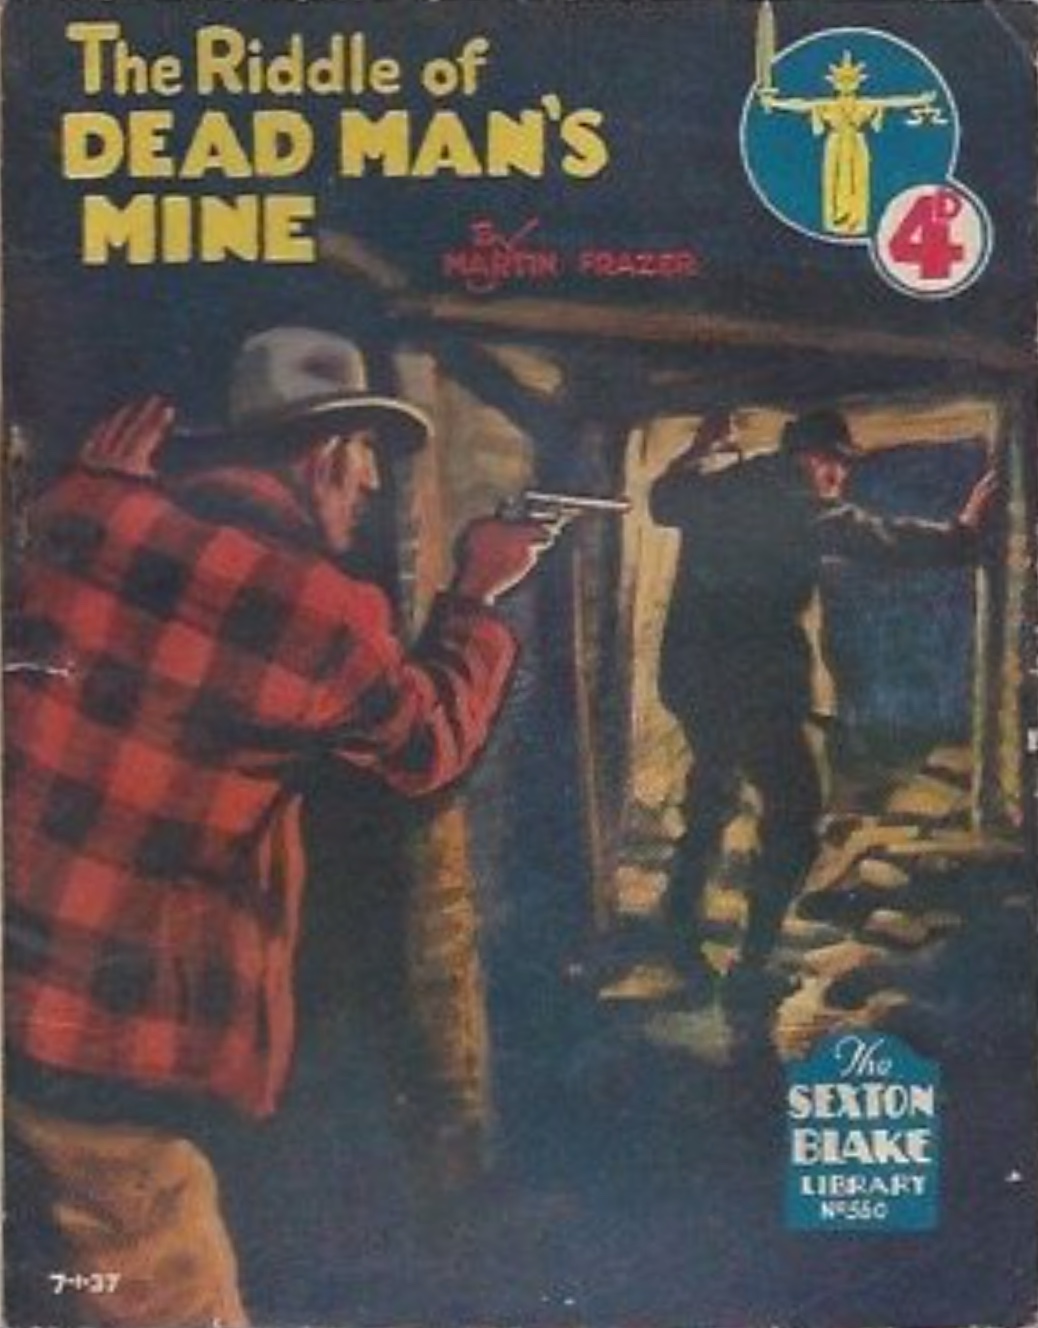 THE RIDDLE OF THE DEAD MAN'S MINE